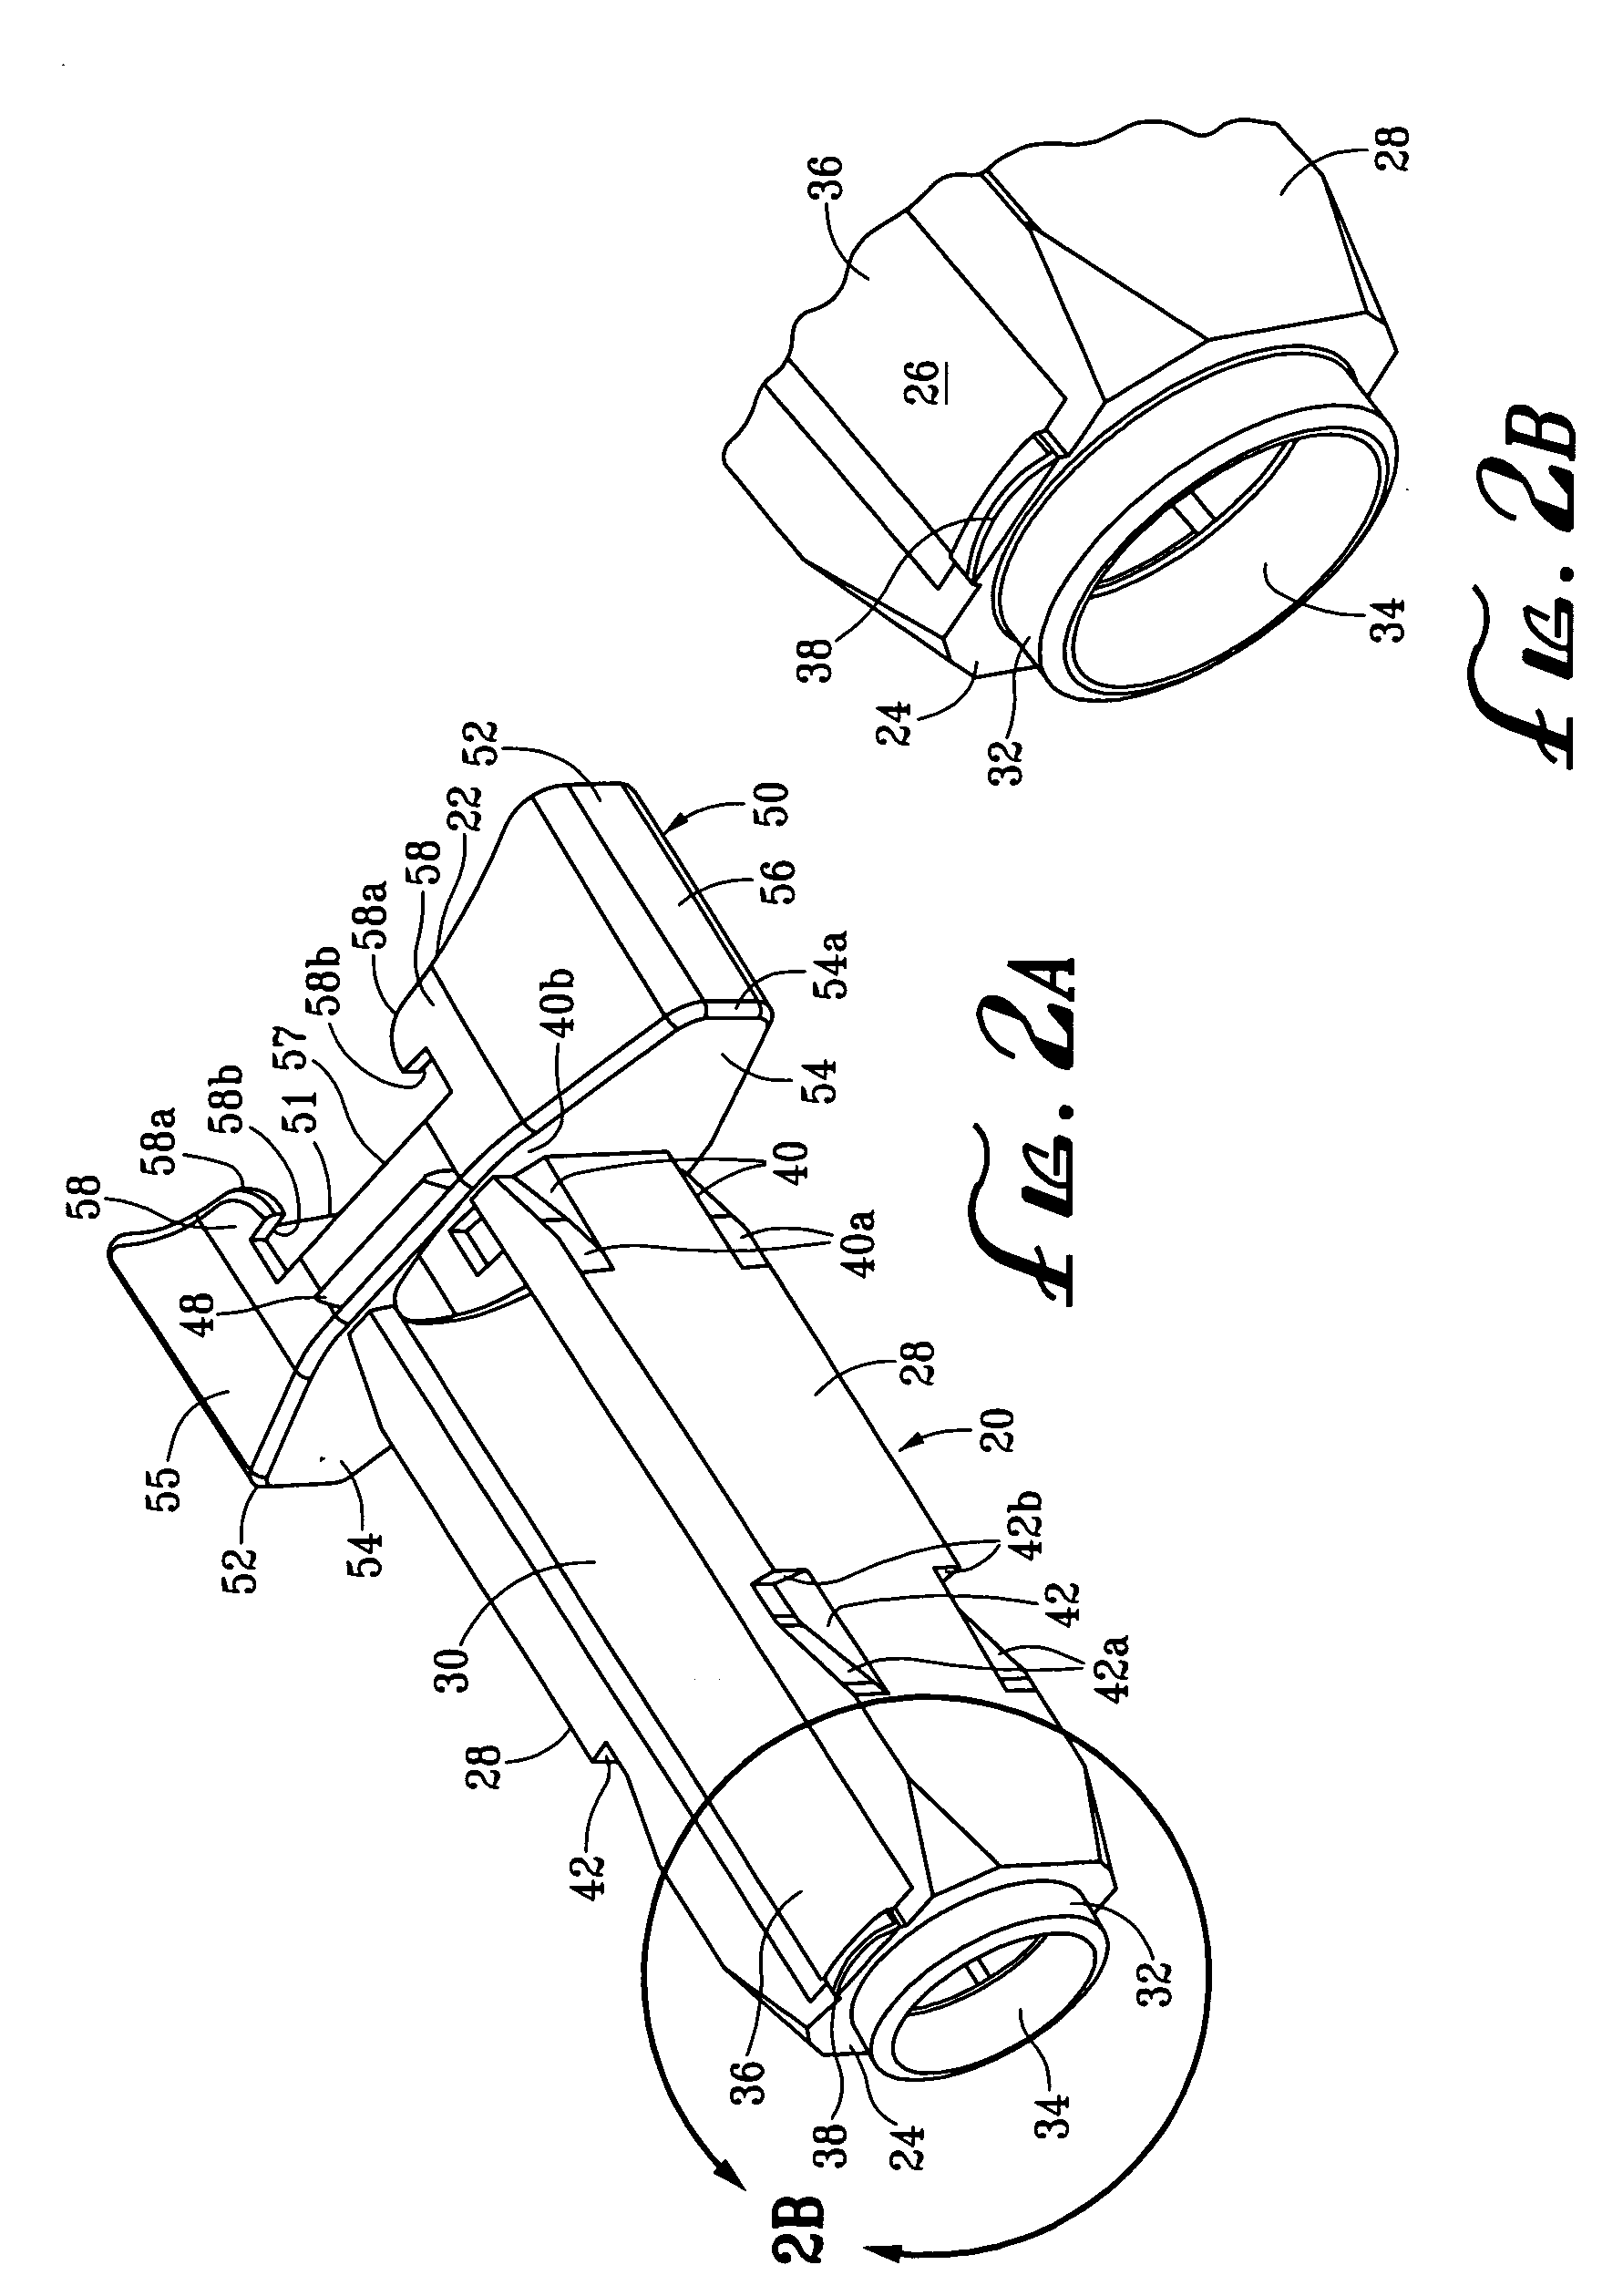 Passive needle guard for syringes